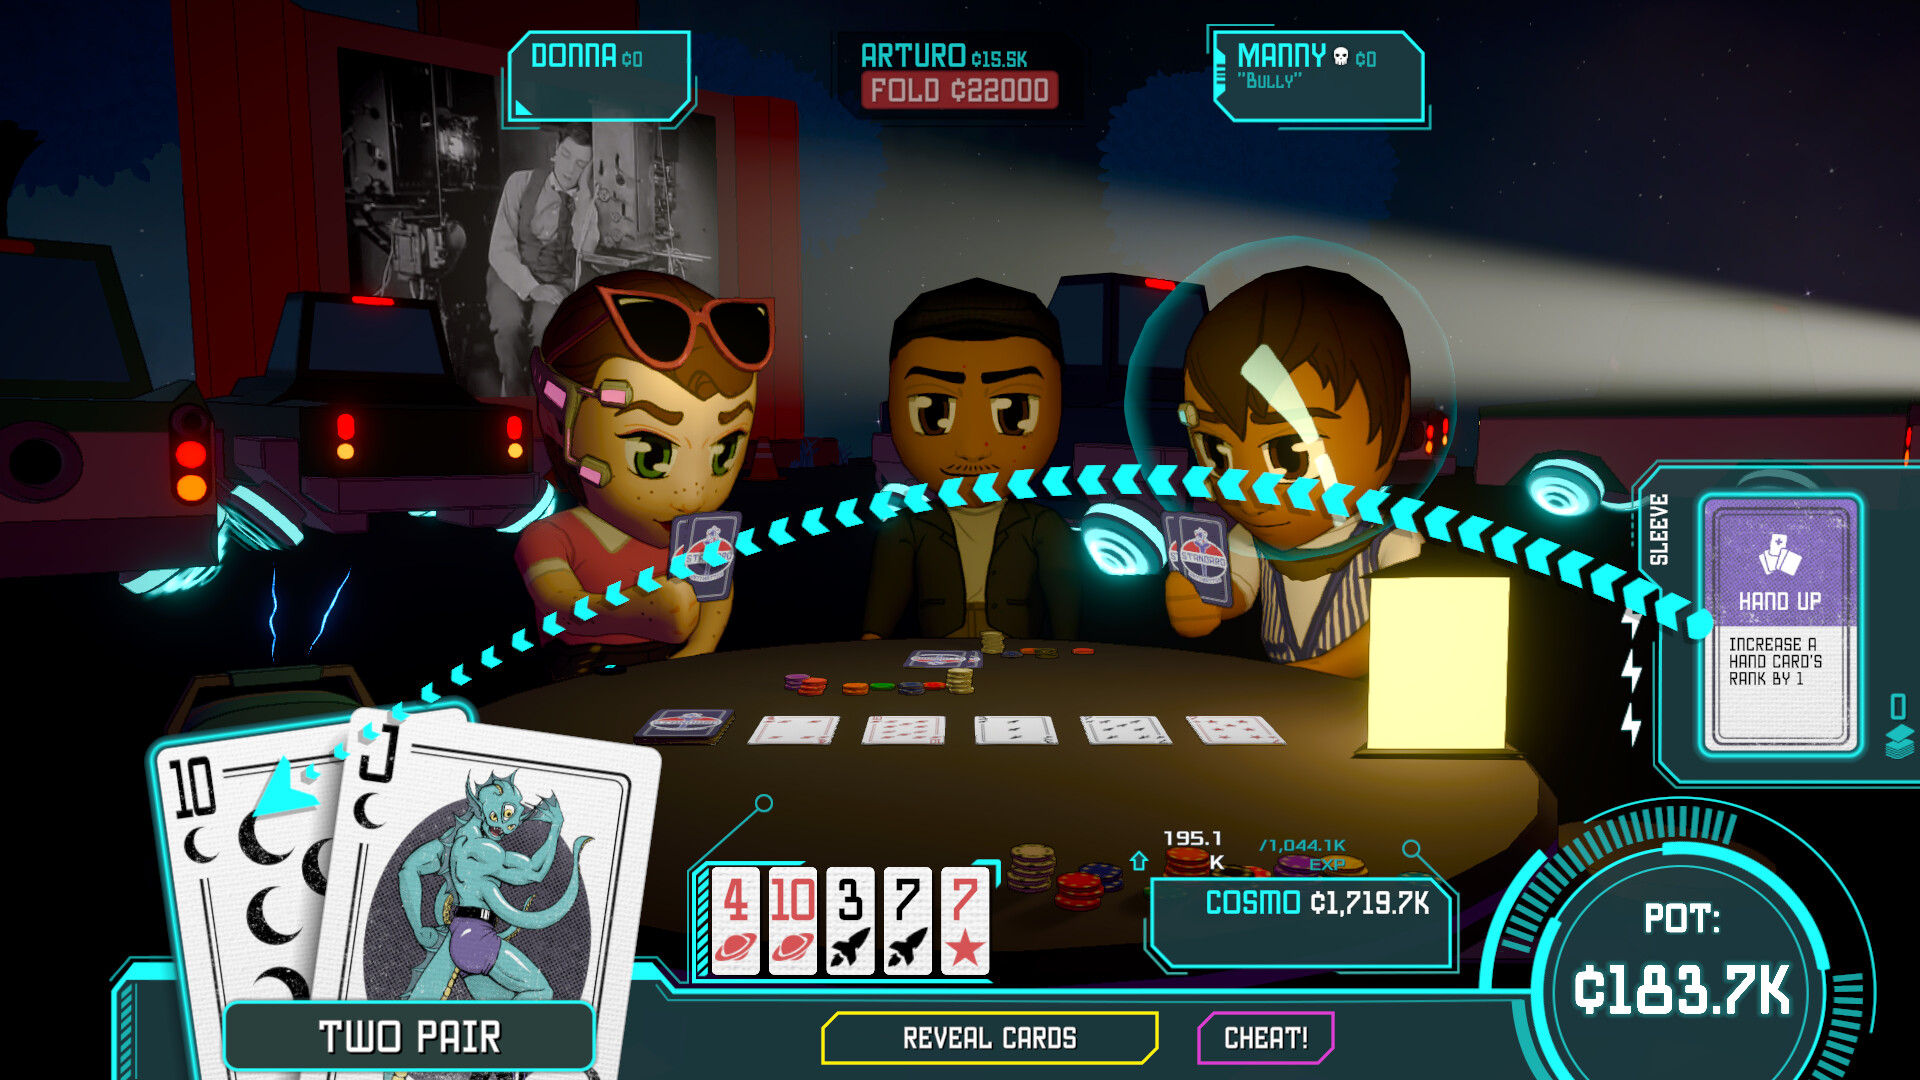 Cosmo Cheats at Poker Steam CD Key [$ 5.54]